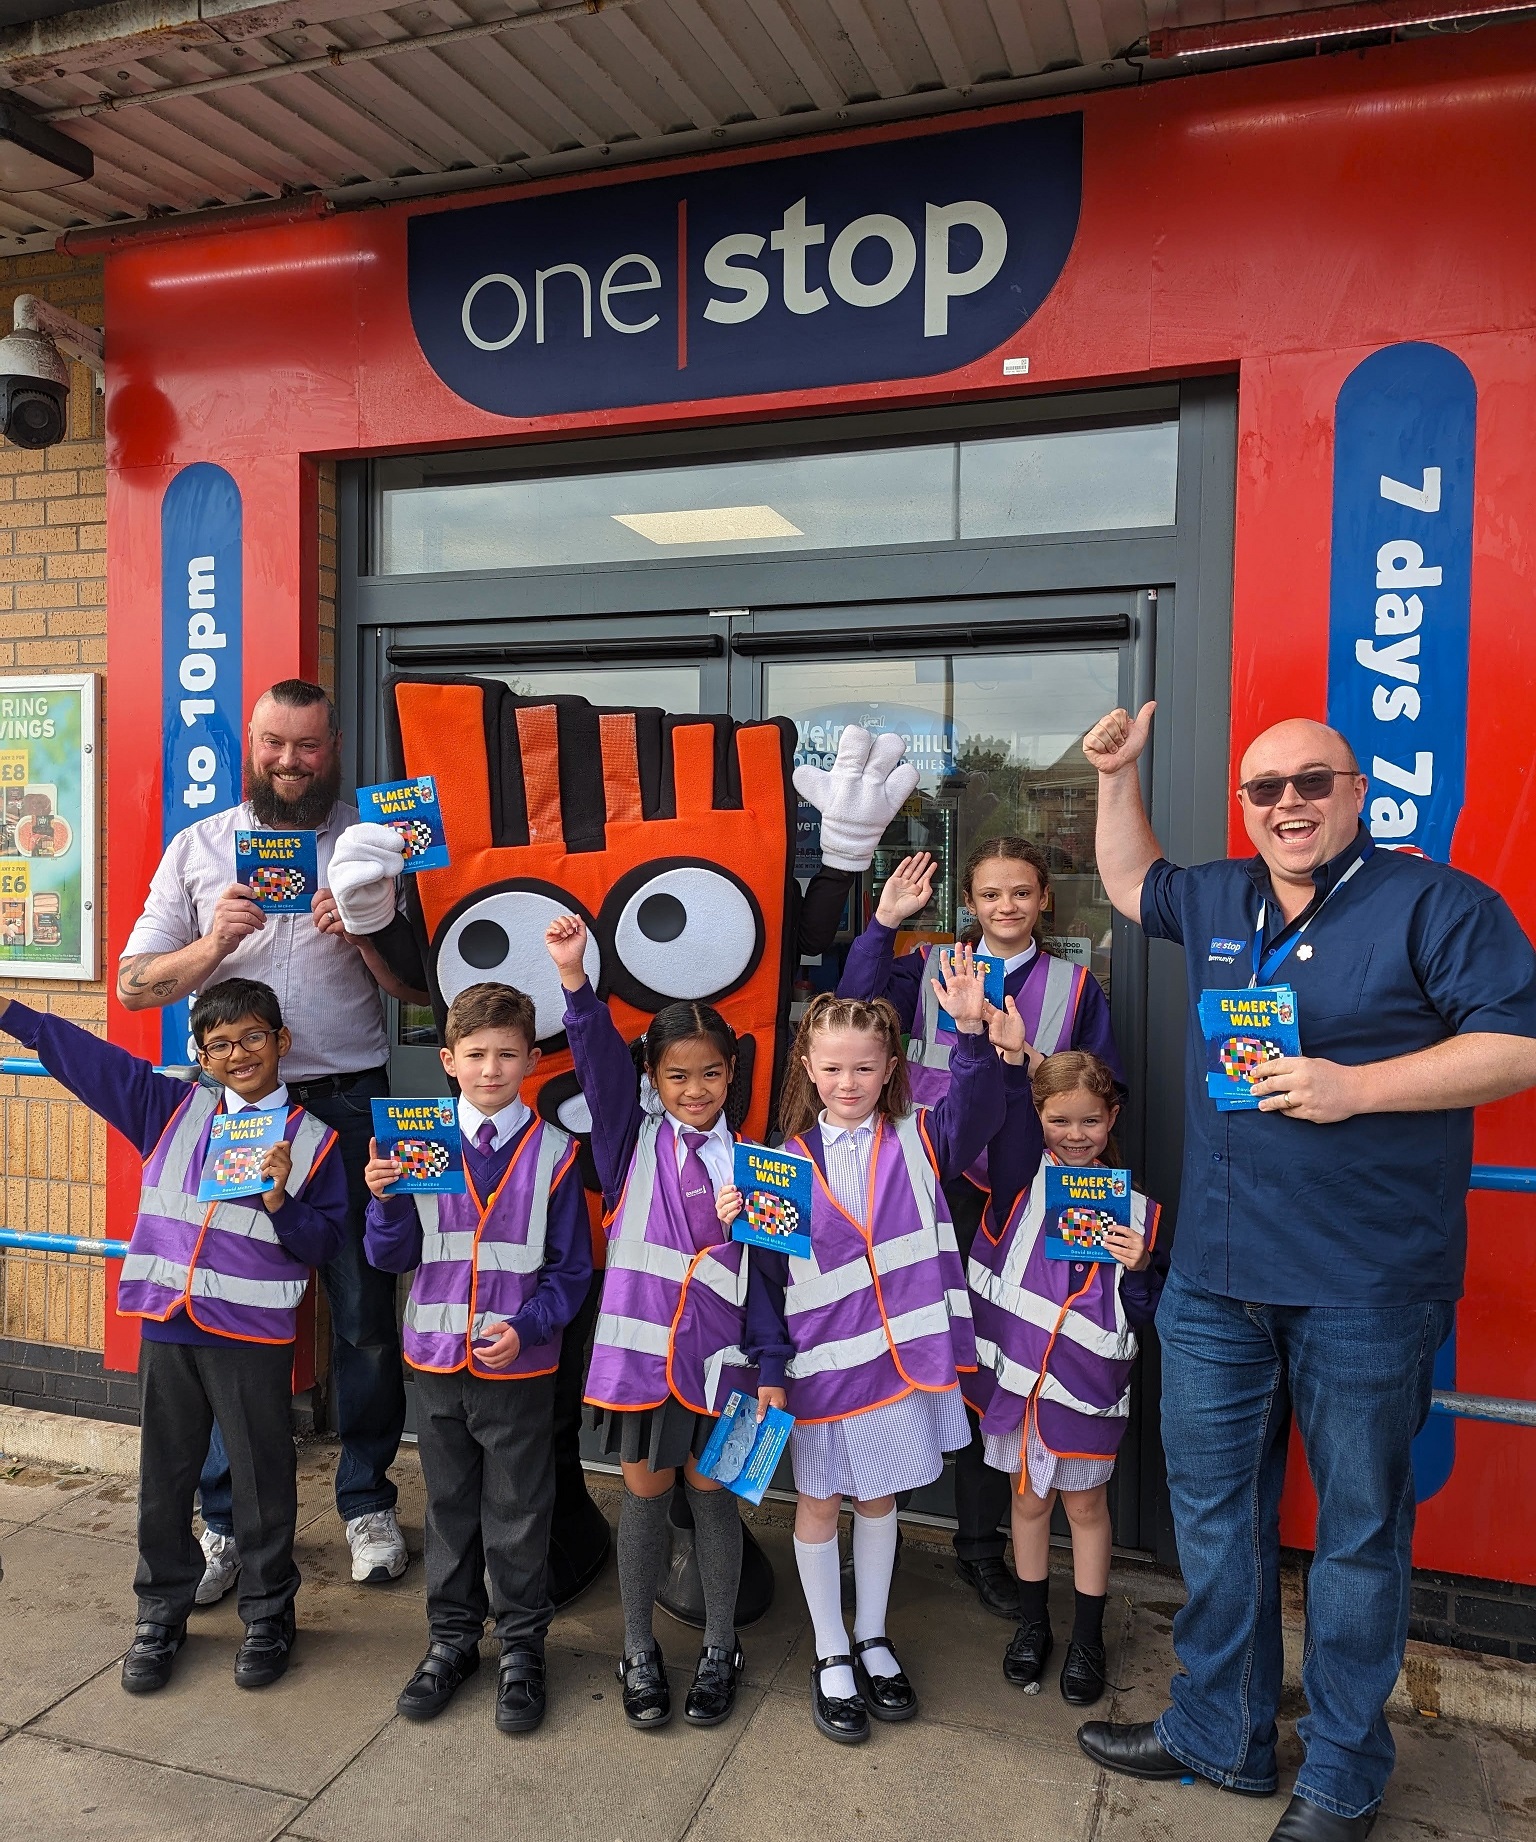 Pupils from Boundary Primary School outside a One Stop store in Blackpool